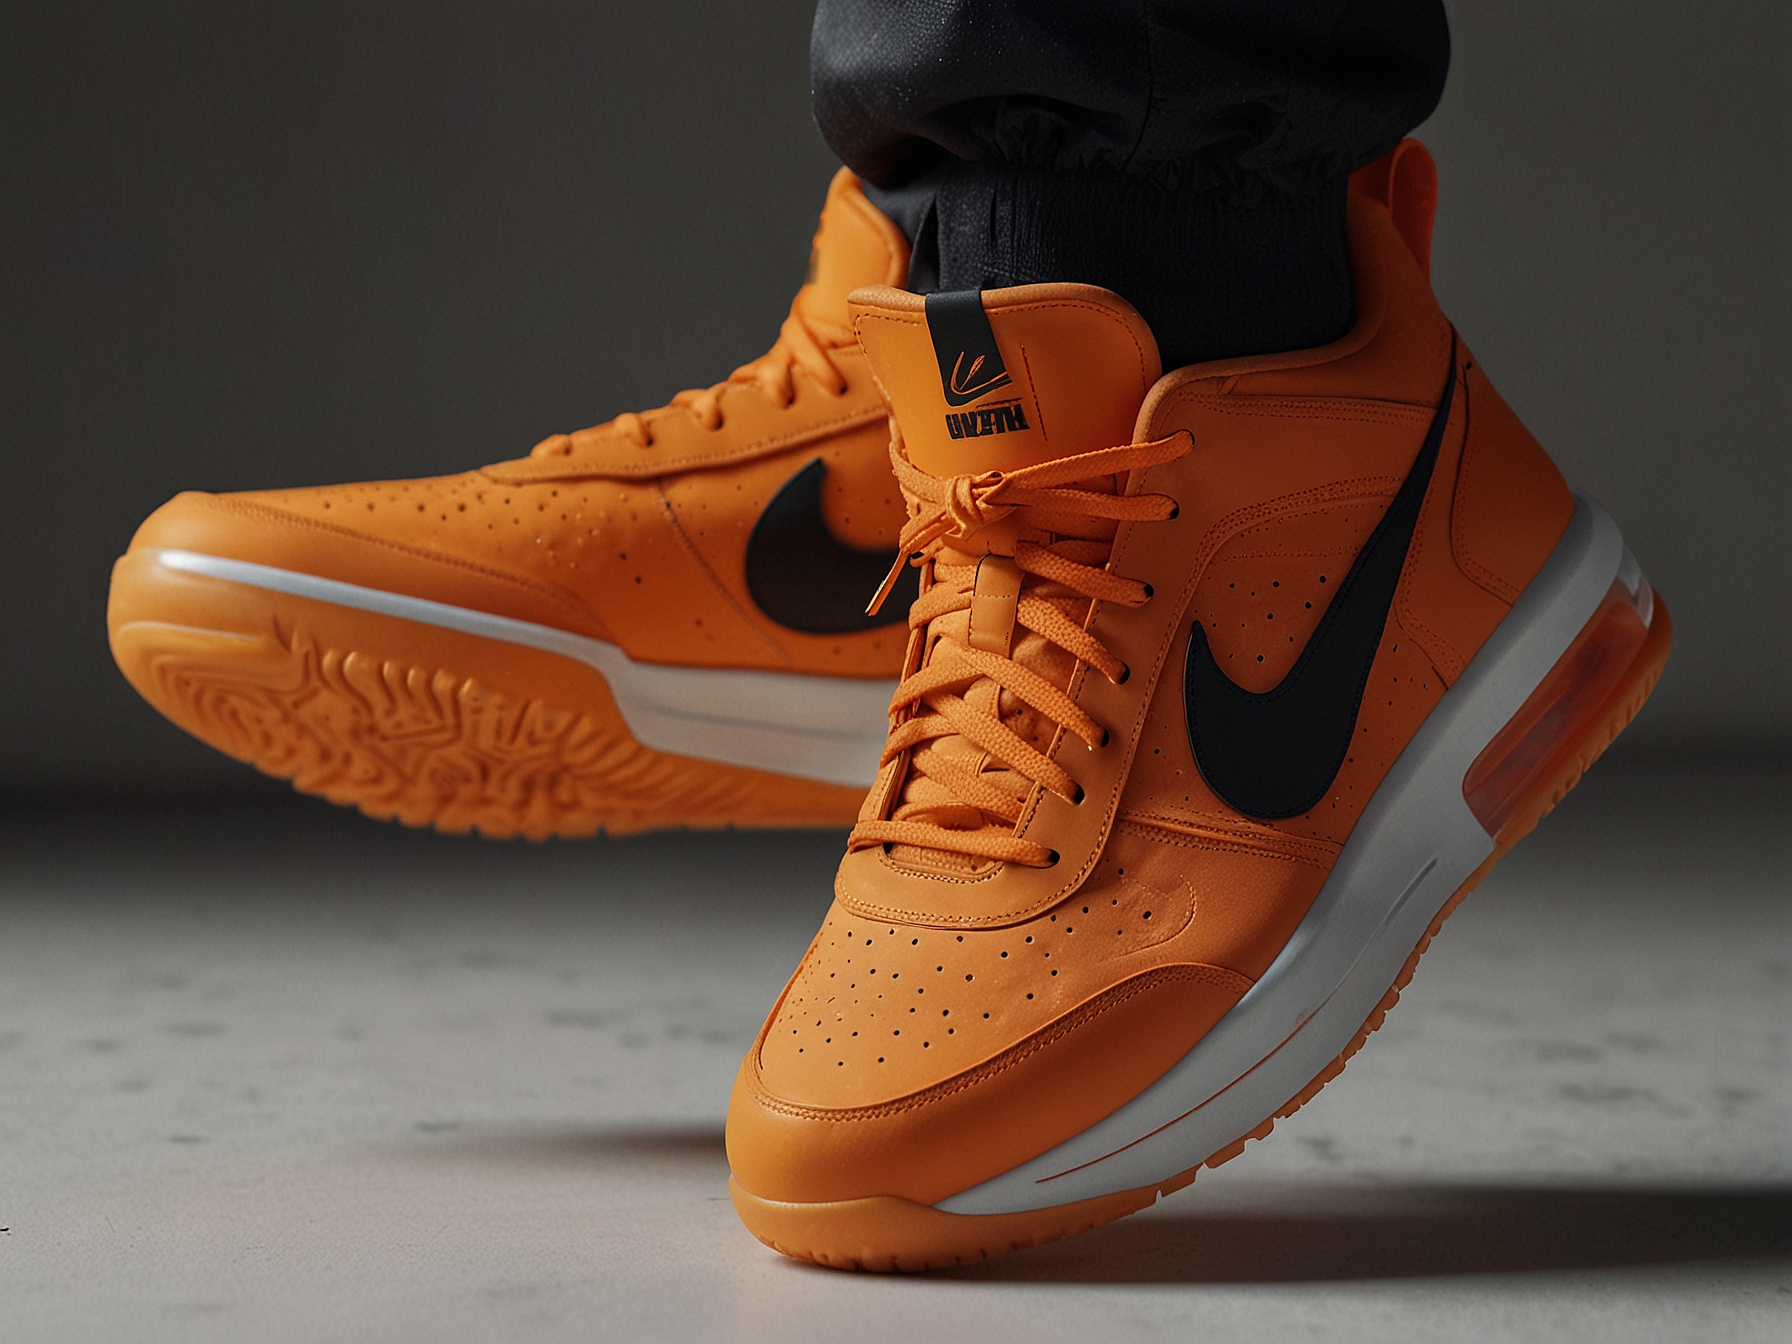 Drake's NOCTA x Nike Hot Step 2 in 'Total Orange' showcased at Milan Fashion Week, capturing attention with its bold hue and popular design, endorsed by the renowned artist.